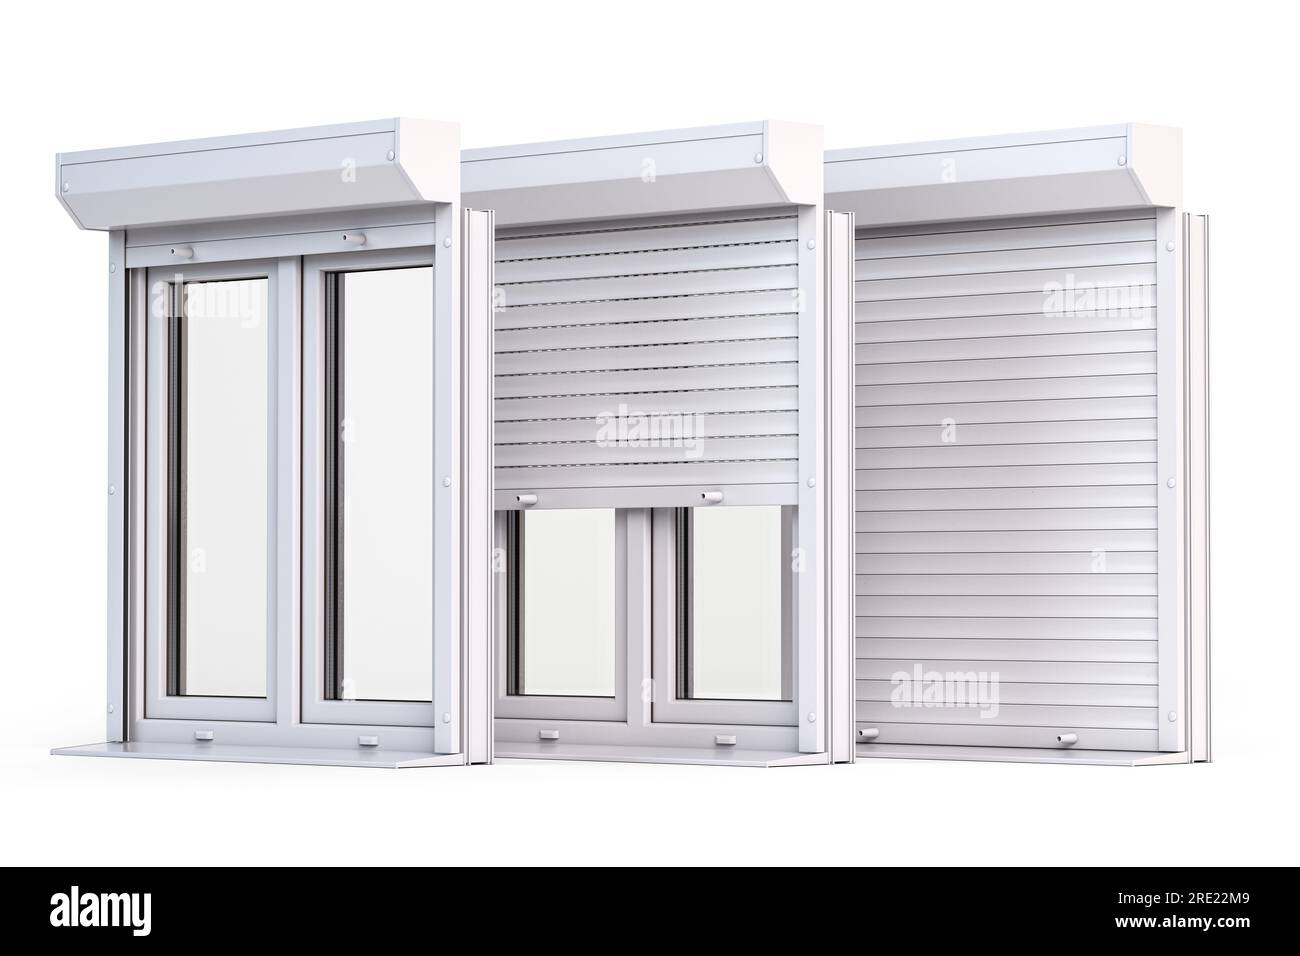 Window roller shutters solated on white background. 3d illustration Stock Photo